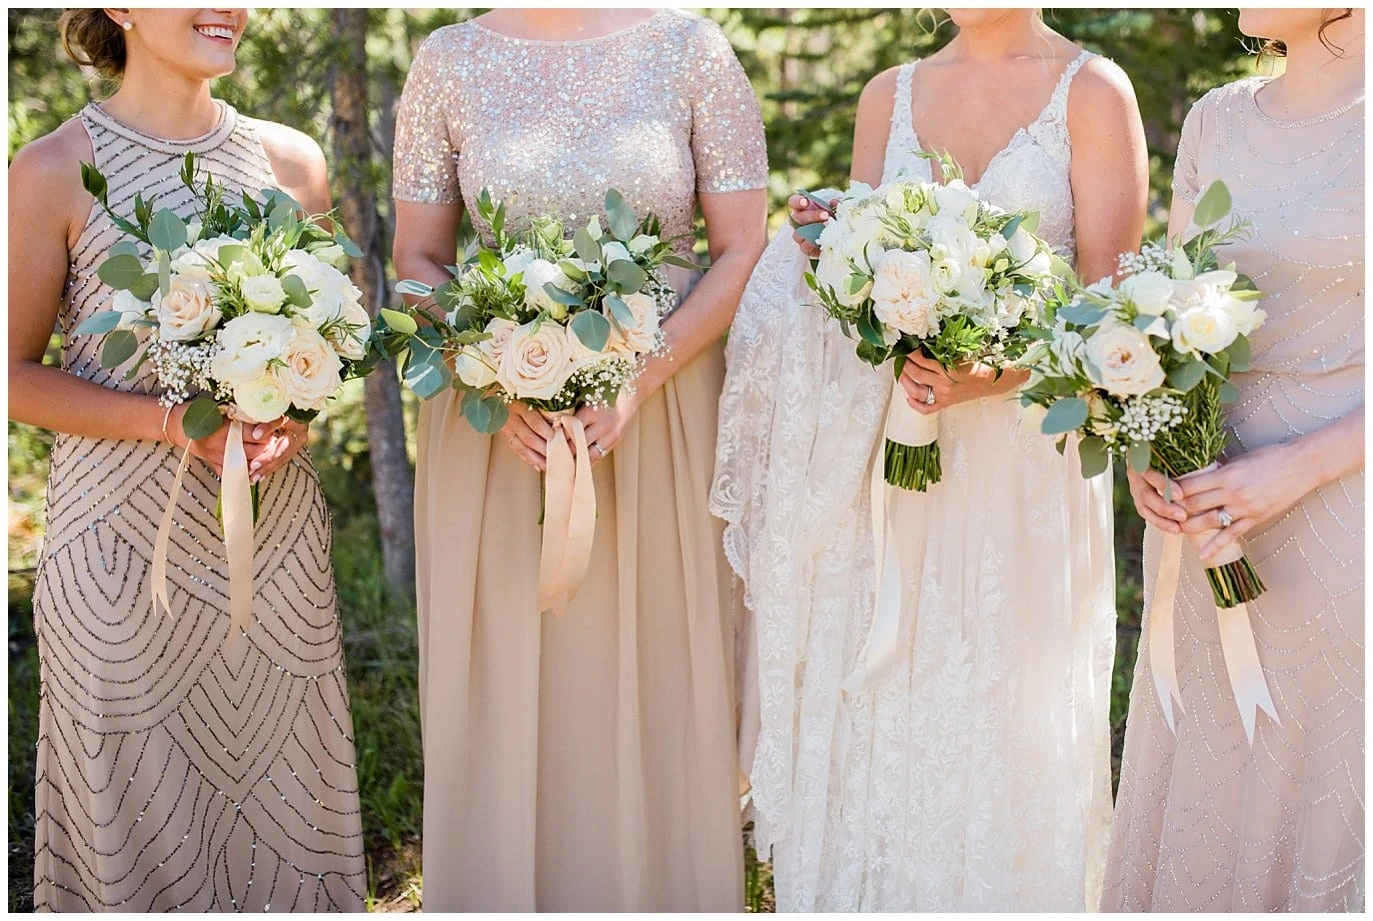 neutral elegant wedding flowers and champagne bridesmaids dresses at Summer Piney River Ranch wedding by Vail wedding photographer Jennie Crate, Photographer